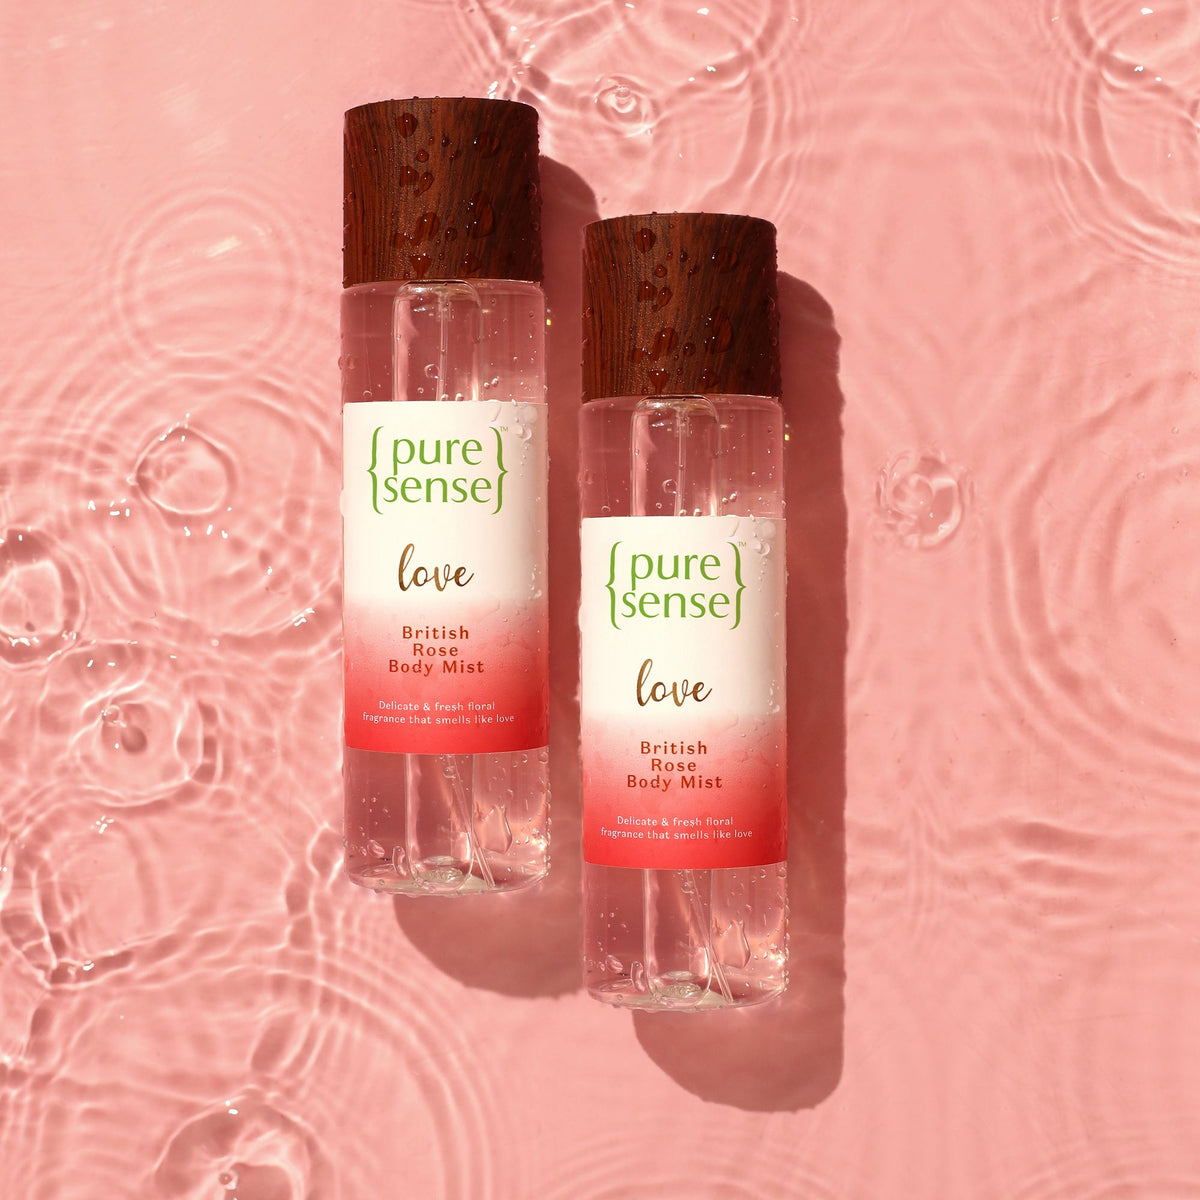 [CRED] Love British Rose Body Mist (Pack of 2) | From the makers of Parachute Advansed | 300ml